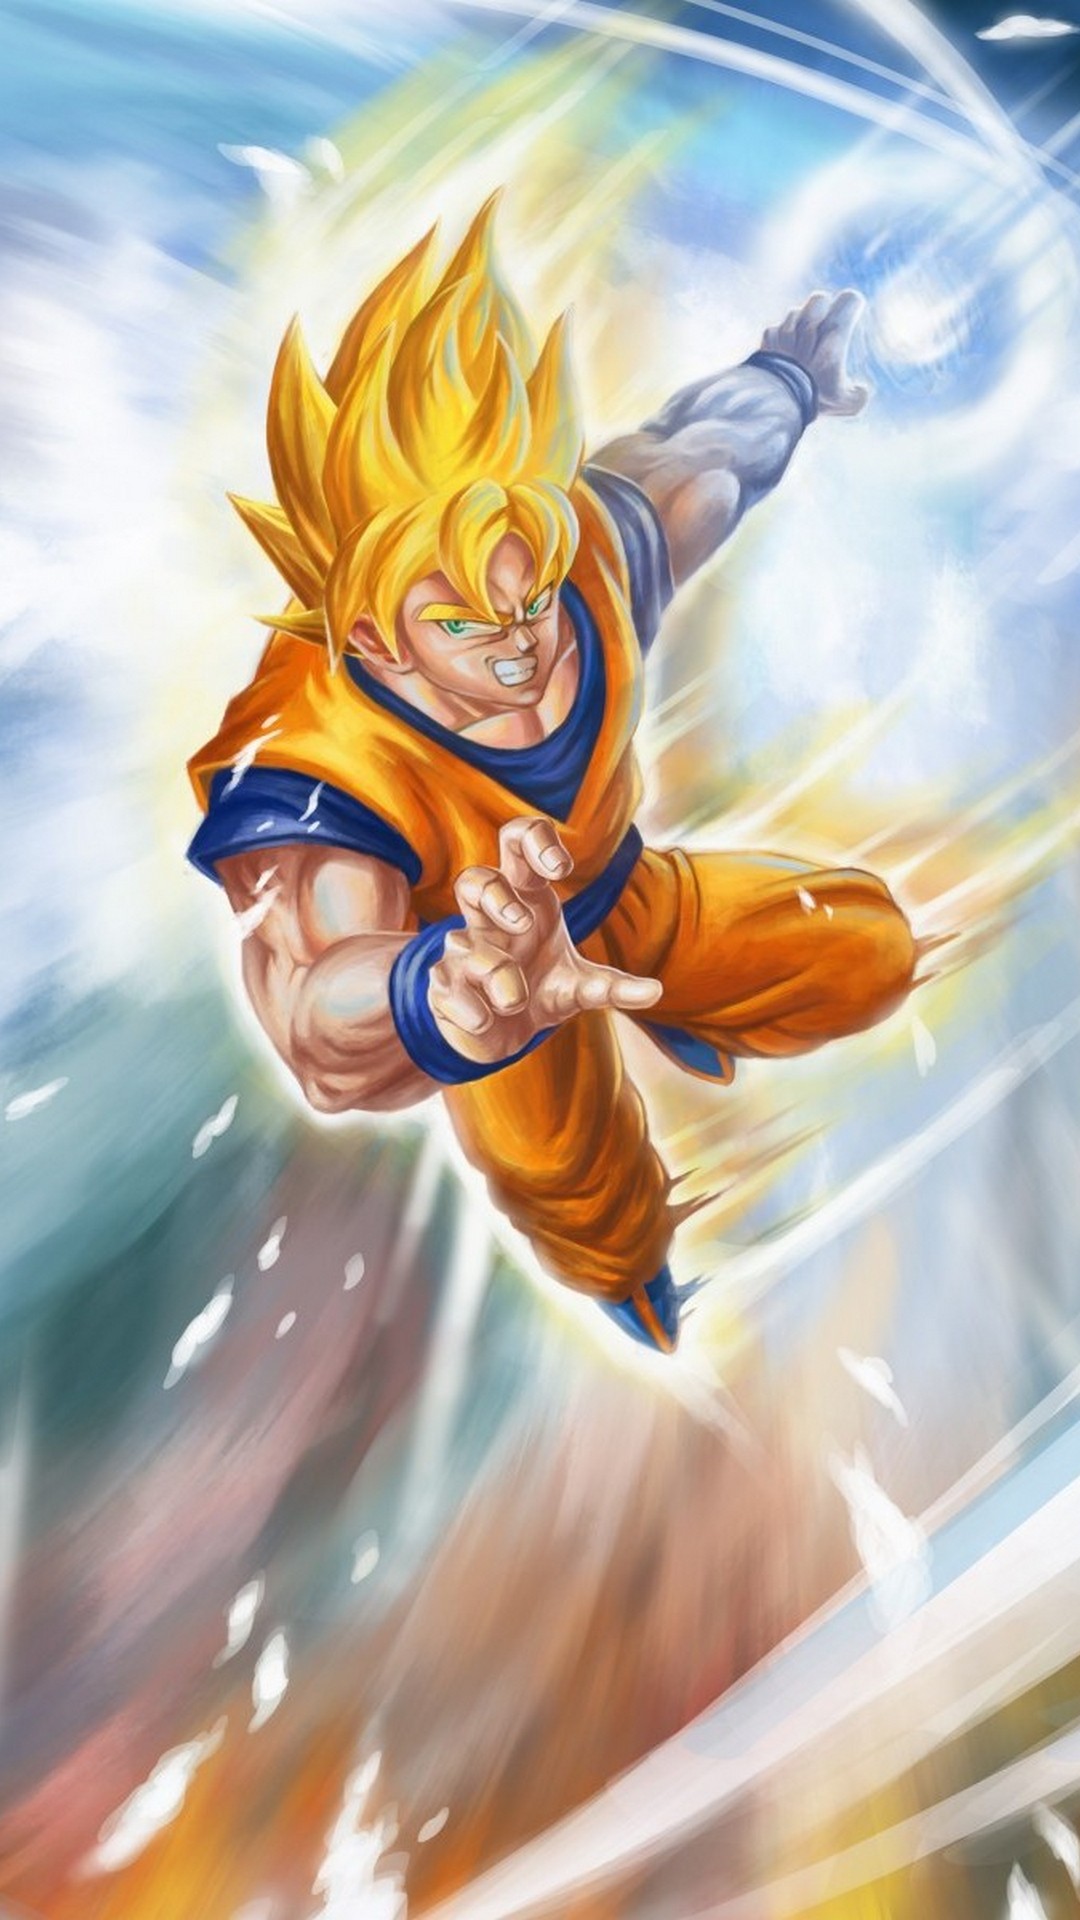 Wallpaper Goku Super Saiyan iPhone with image resolution 1080x1920 pixel. You can make this wallpaper for your iPhone 5, 6, 7, 8, X backgrounds, Mobile Screensaver, or iPad Lock Screen